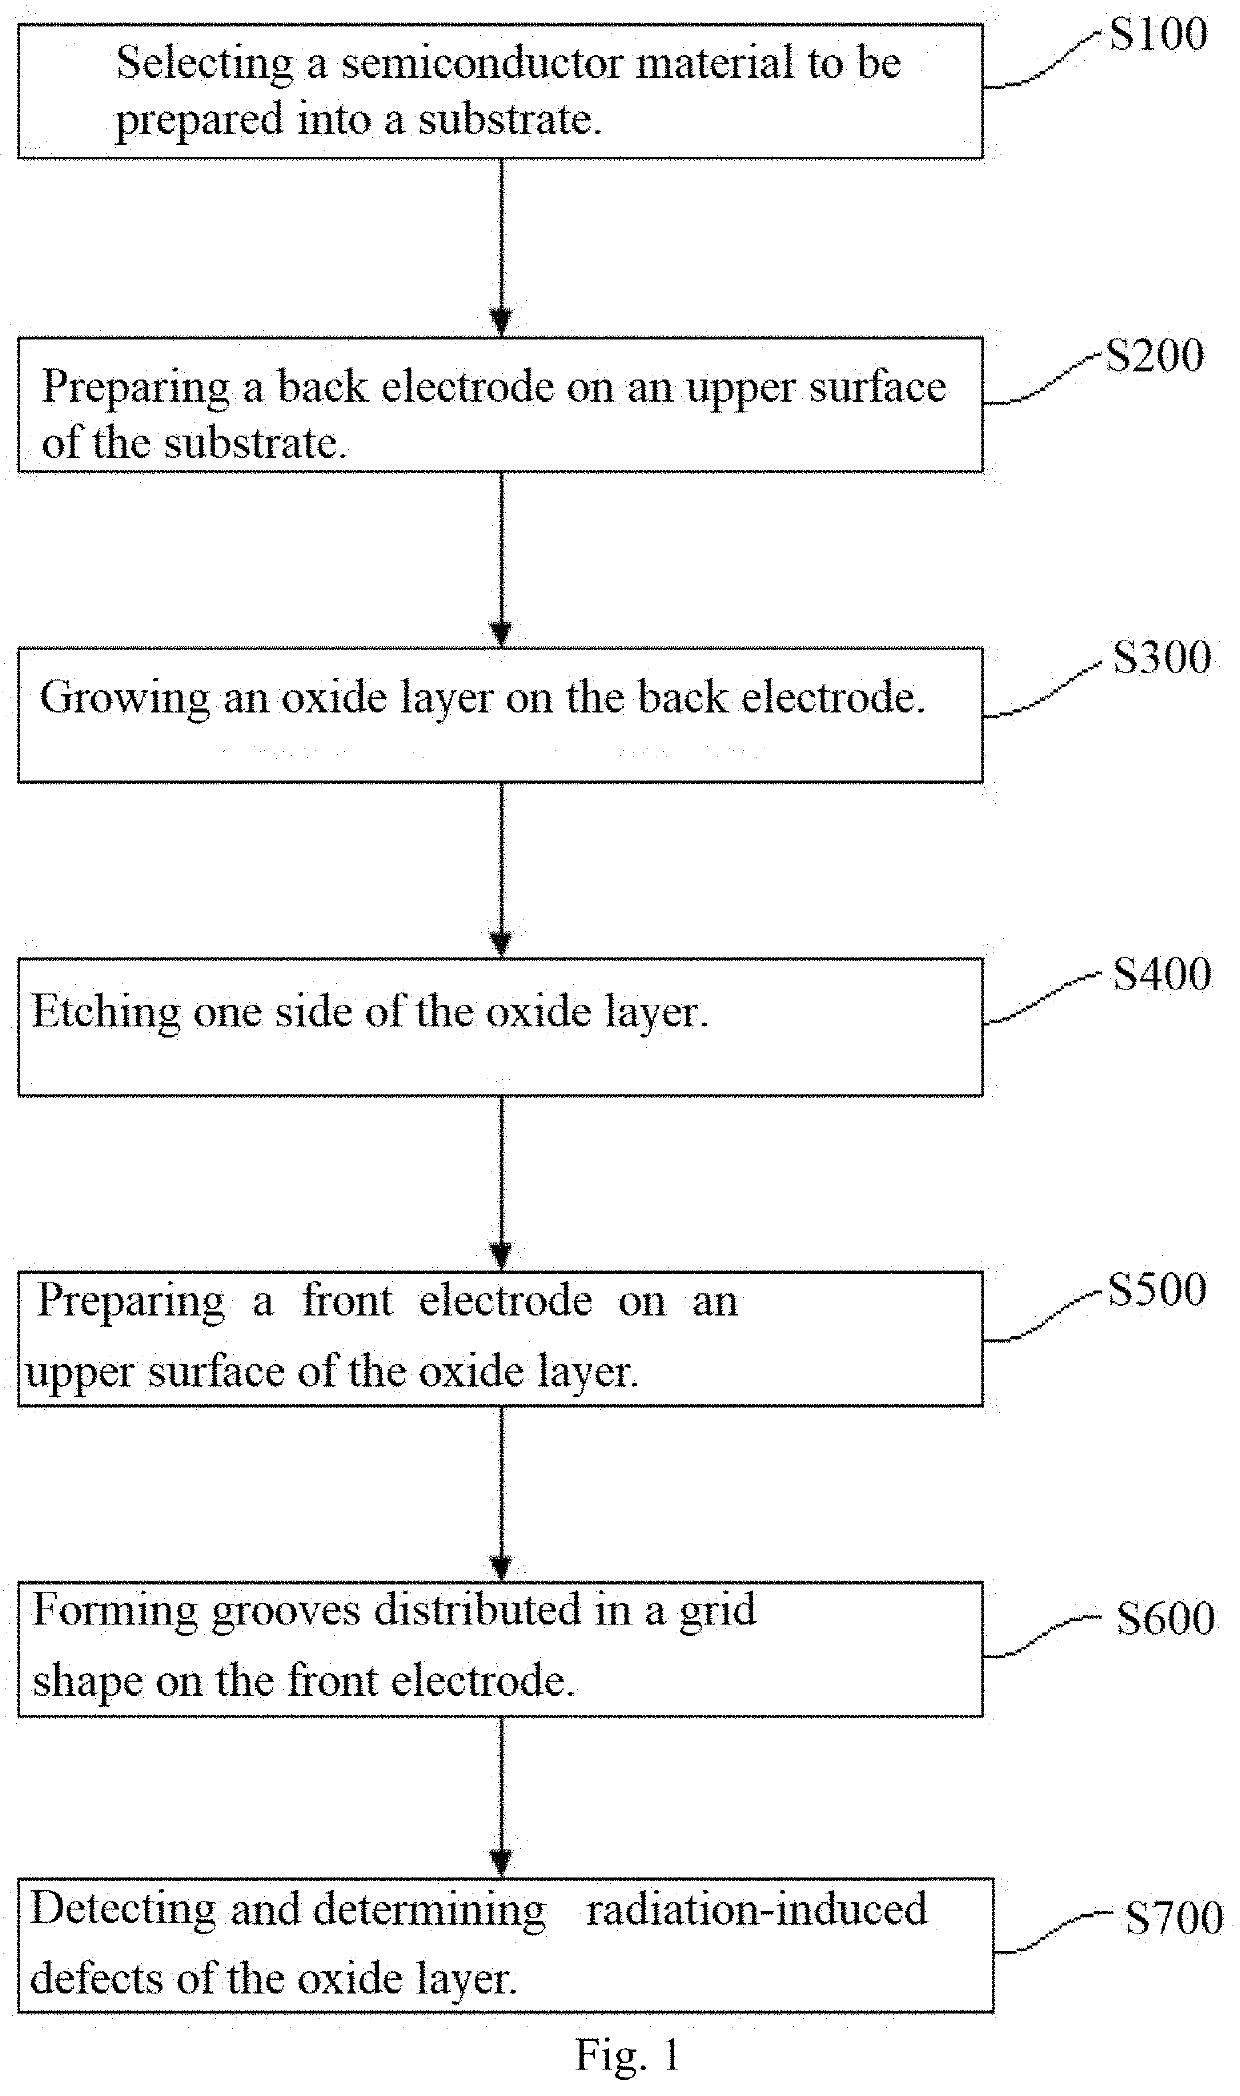 Detection Method for the Radiation-induced Defects of Oxide Layer in Electronic Devices